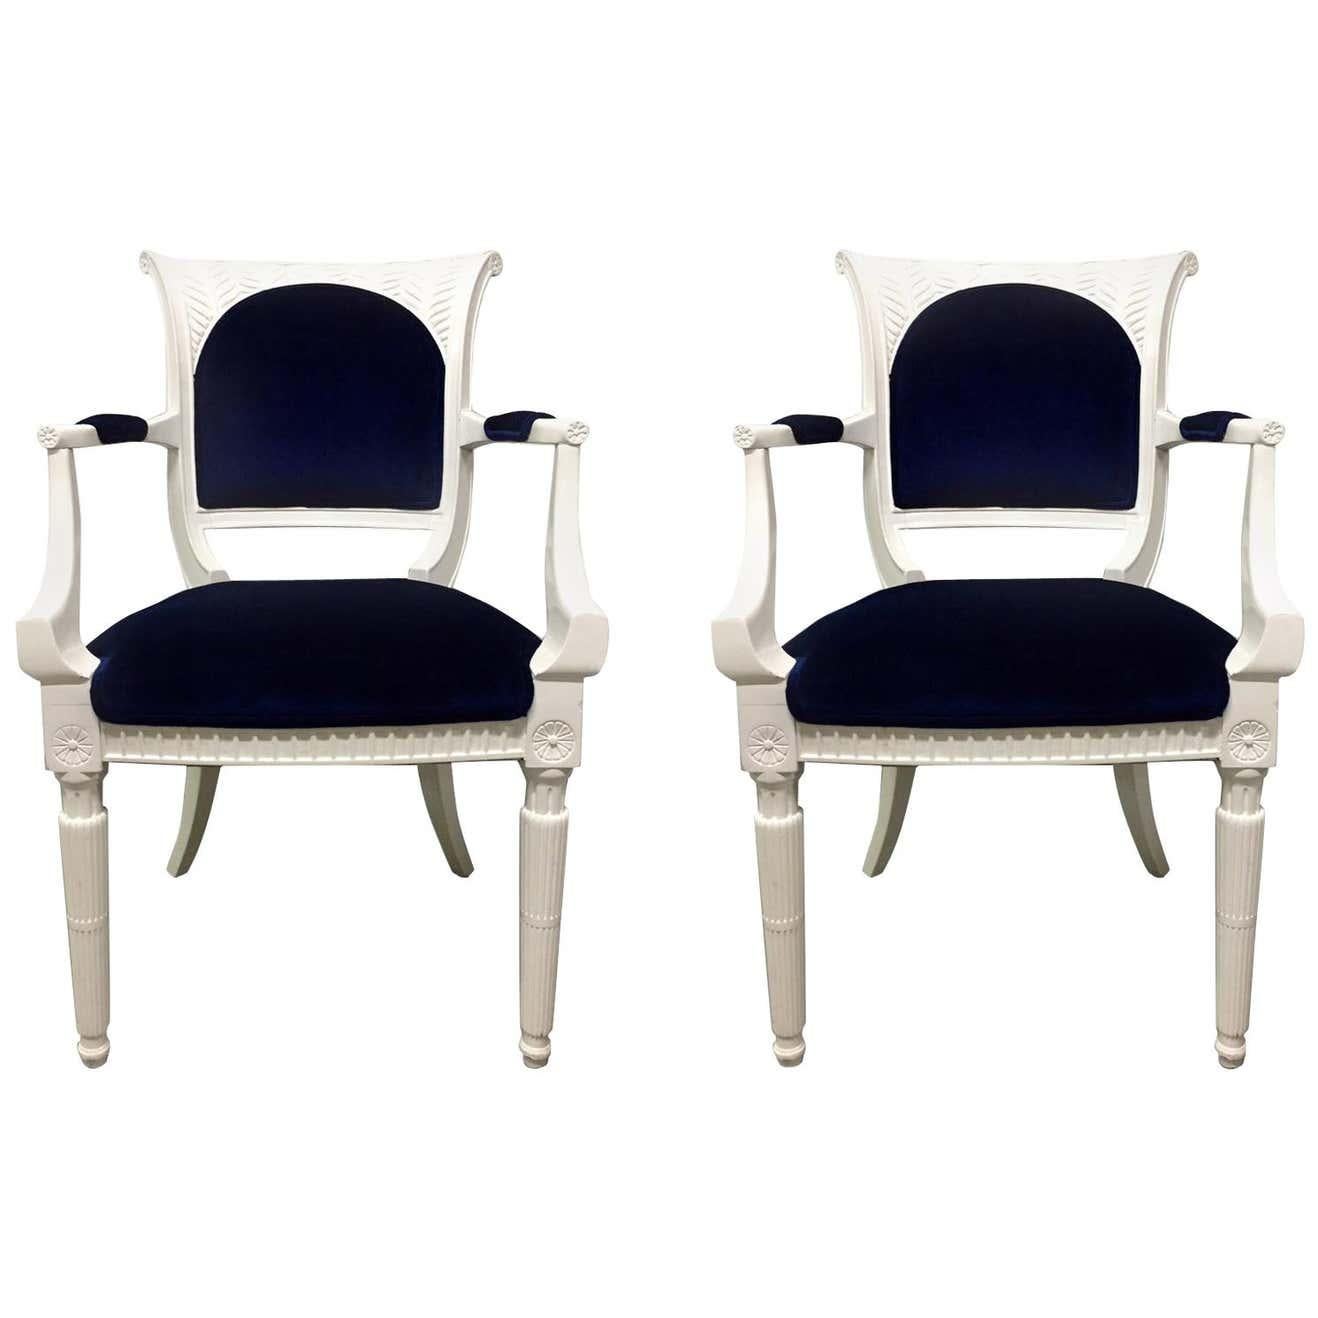 Pair of 1940s Lacquered Regency Style Armchairs in Blue Mohair